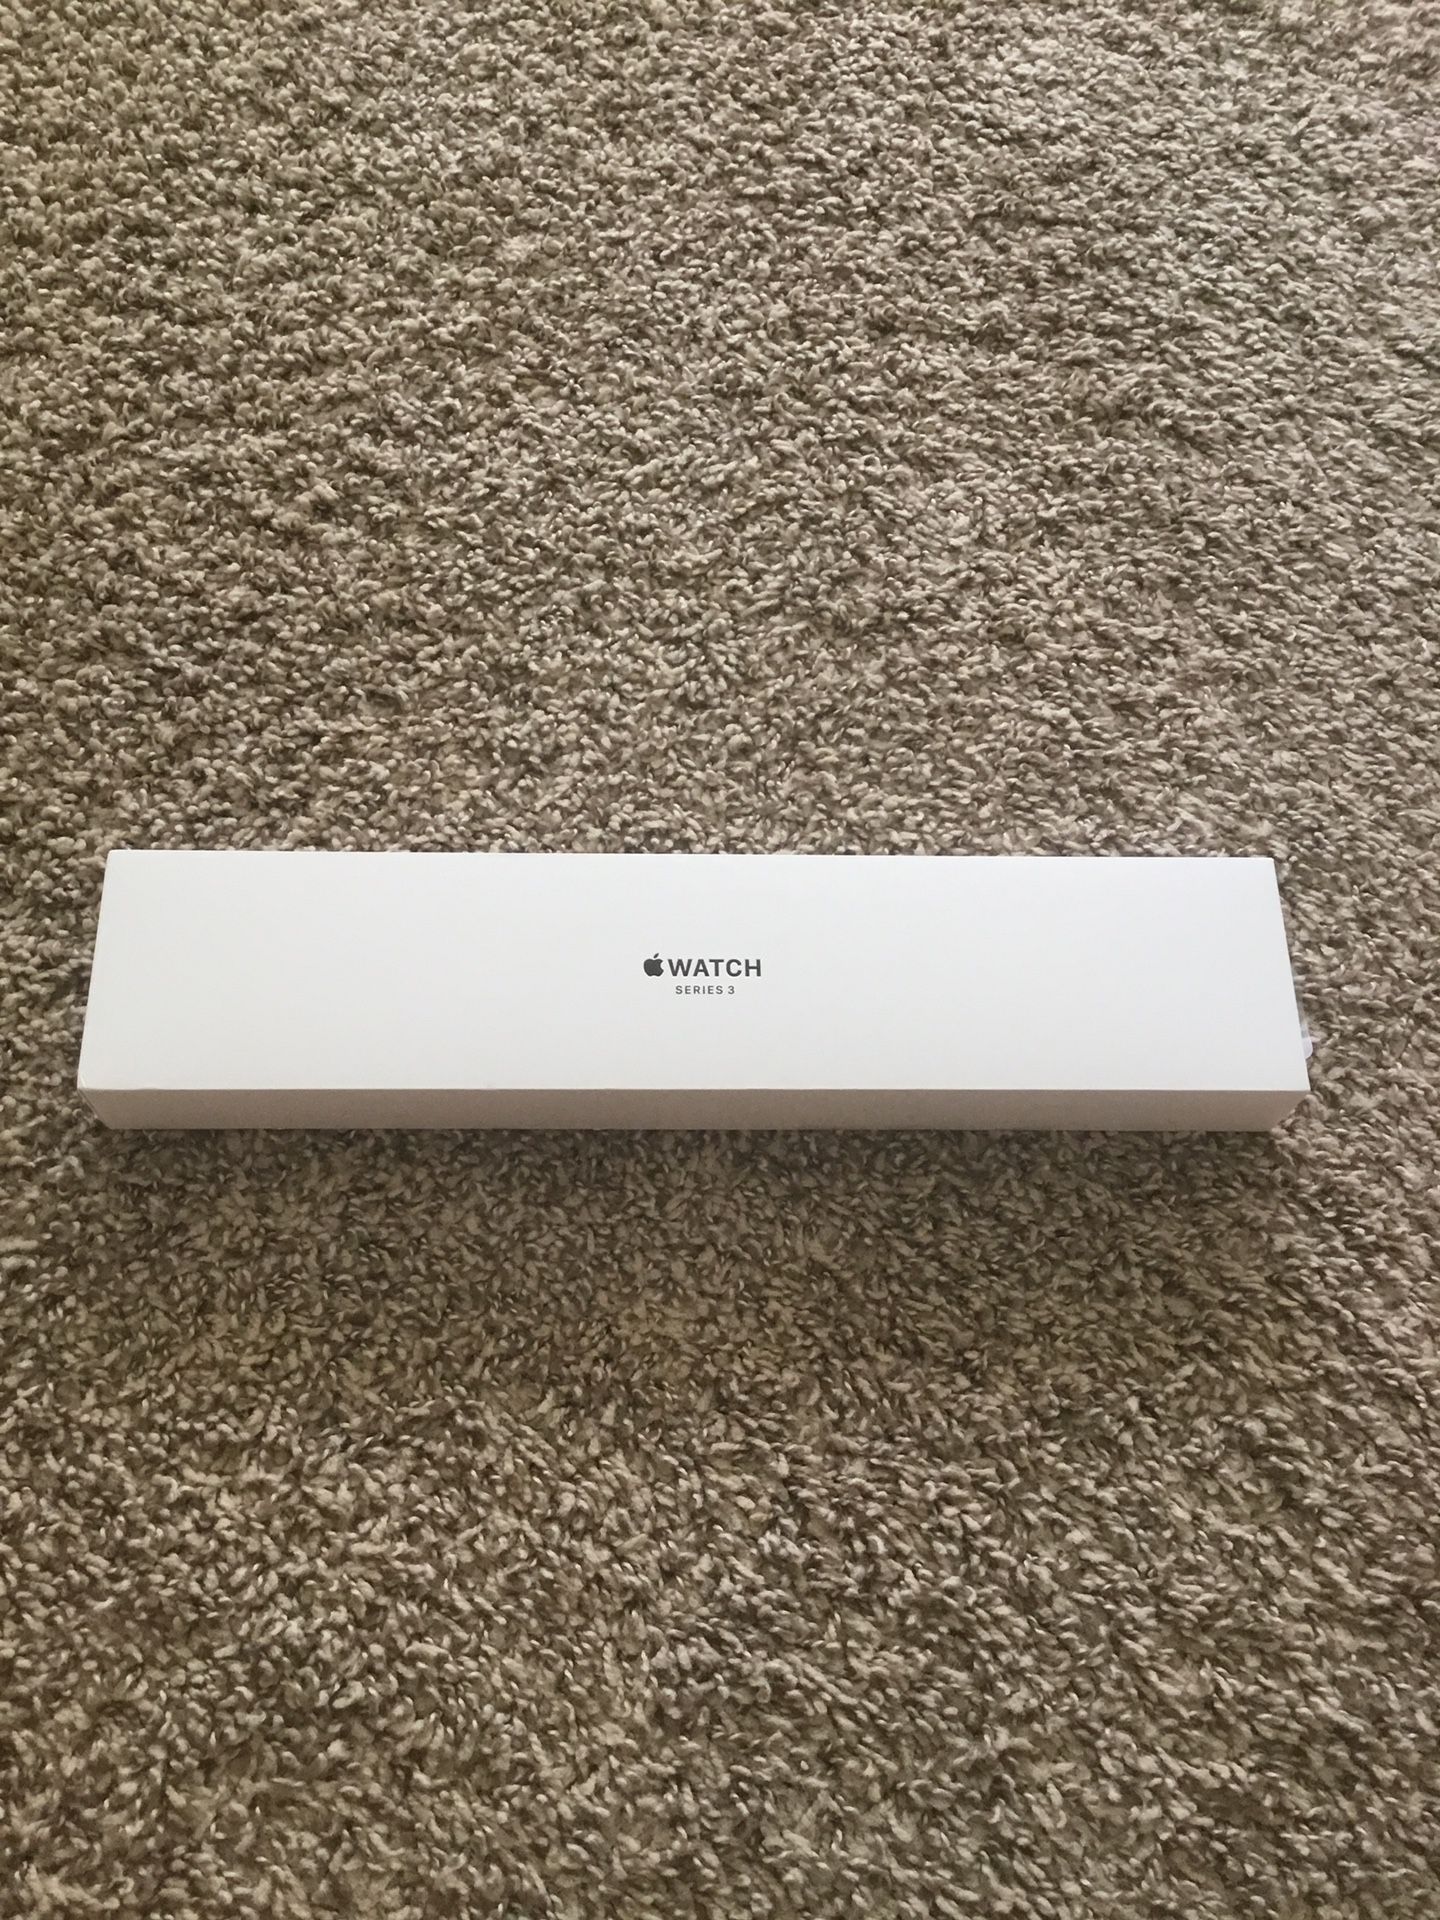 Apple Watch series 3 42mm space grey aluminum BOX ONLY